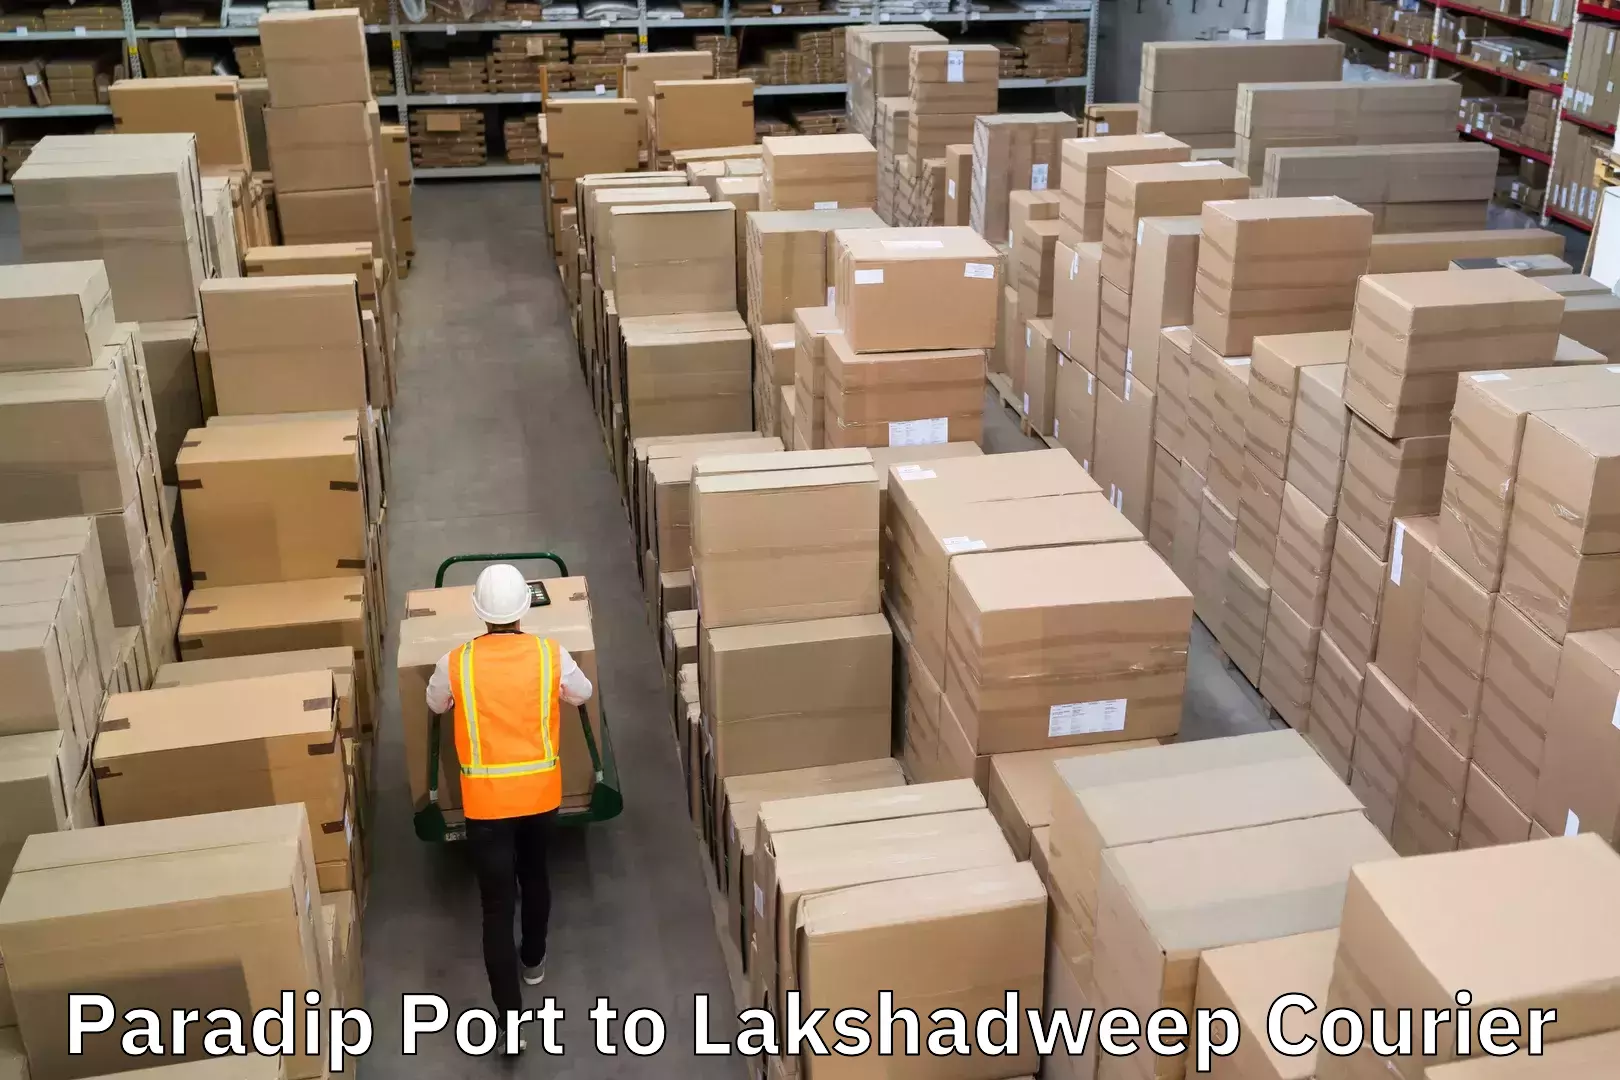 E-commerce fulfillment in Paradip Port to Lakshadweep